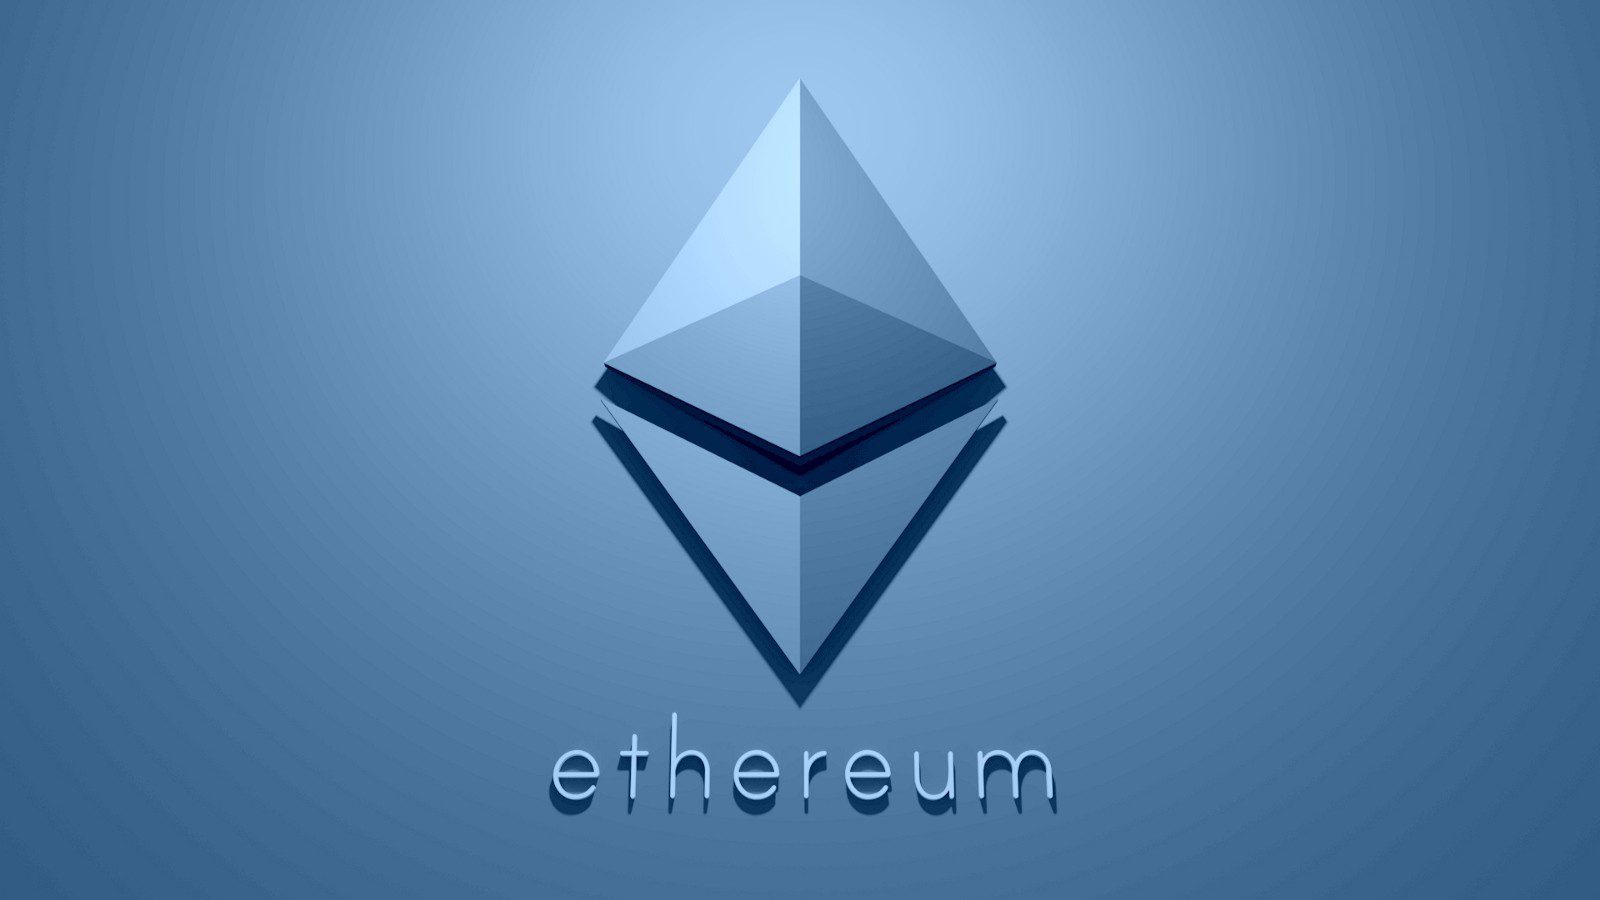 Ethereum is one of the most mature enterprise blockchain platforms available today